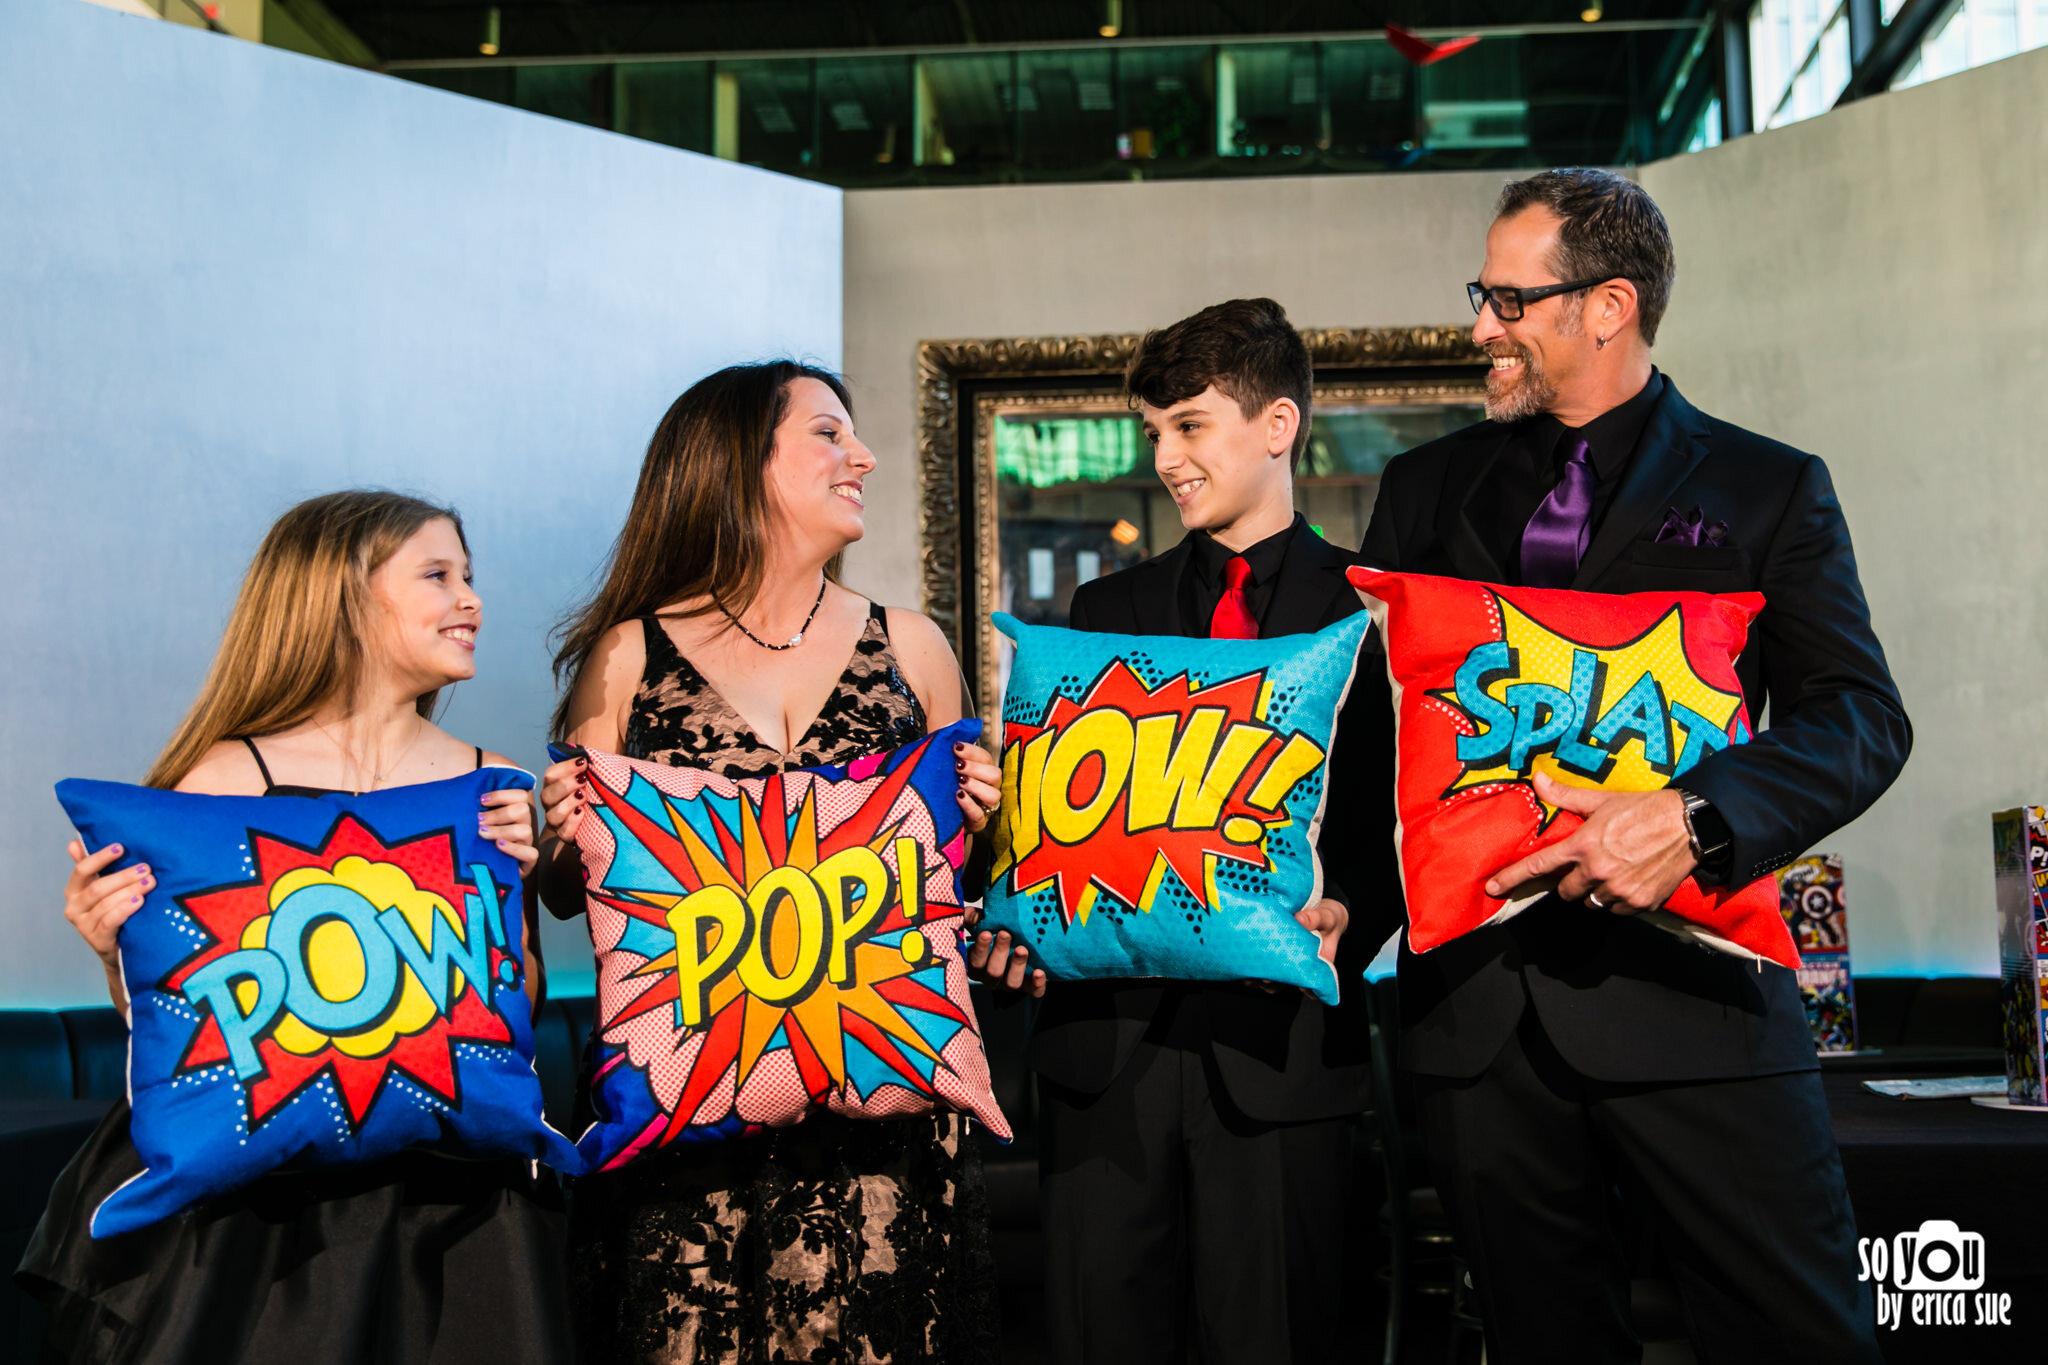 24-so-you-by-erica-sue-bar-mitzvah-photographer-boca-pavilion-grille-5089.JPG